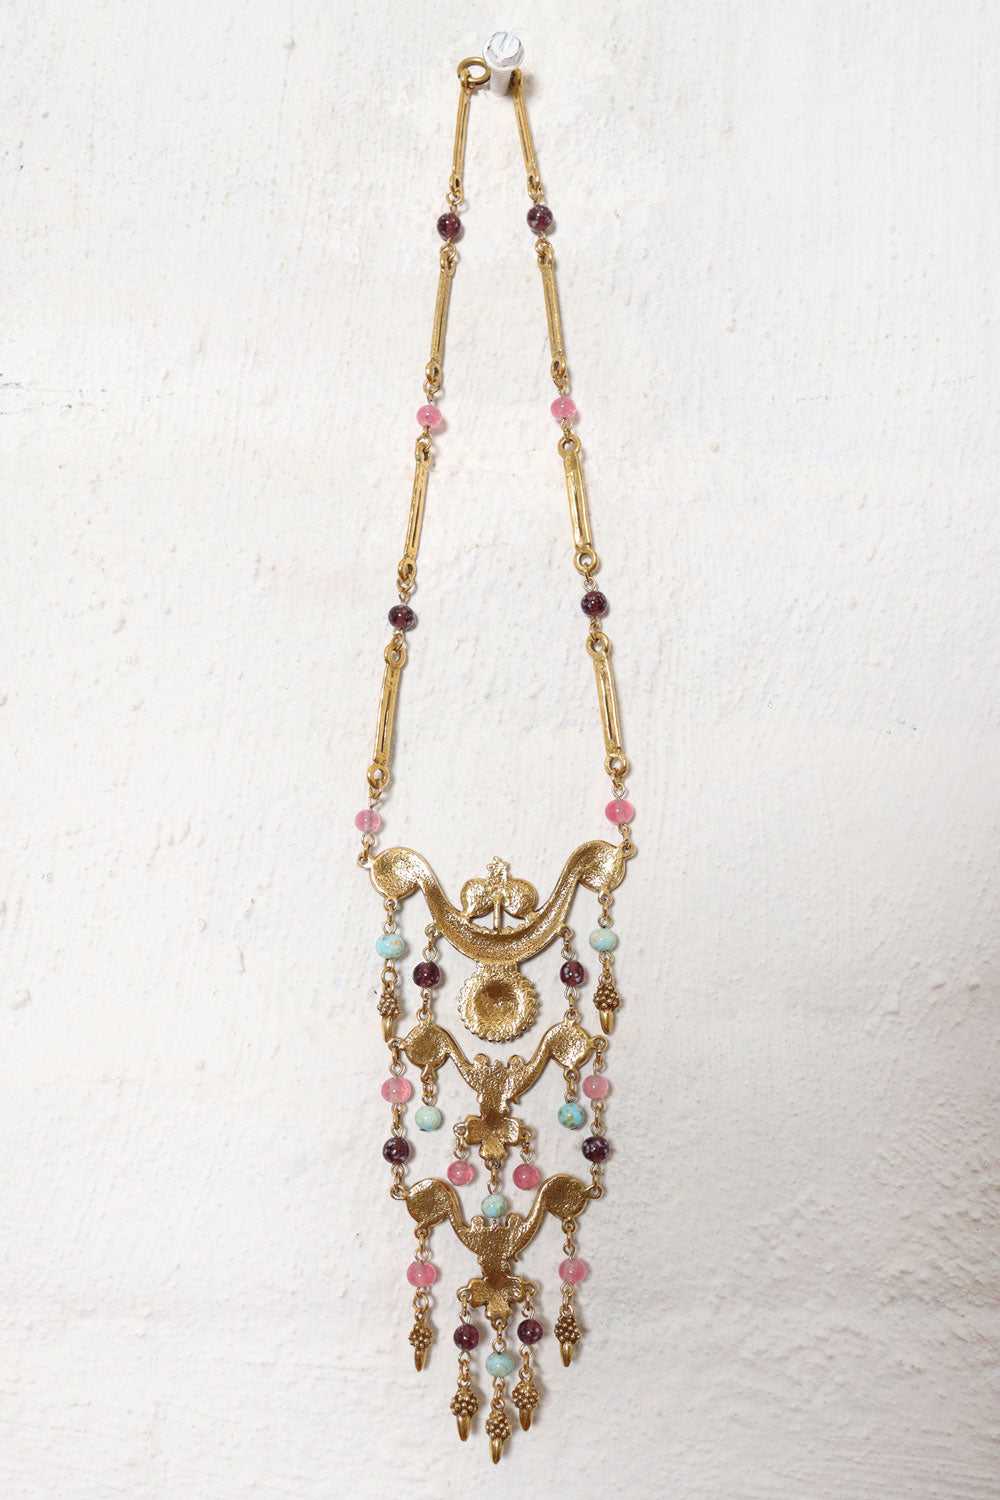 Glass Bead Gilded Statement Necklace - image 4